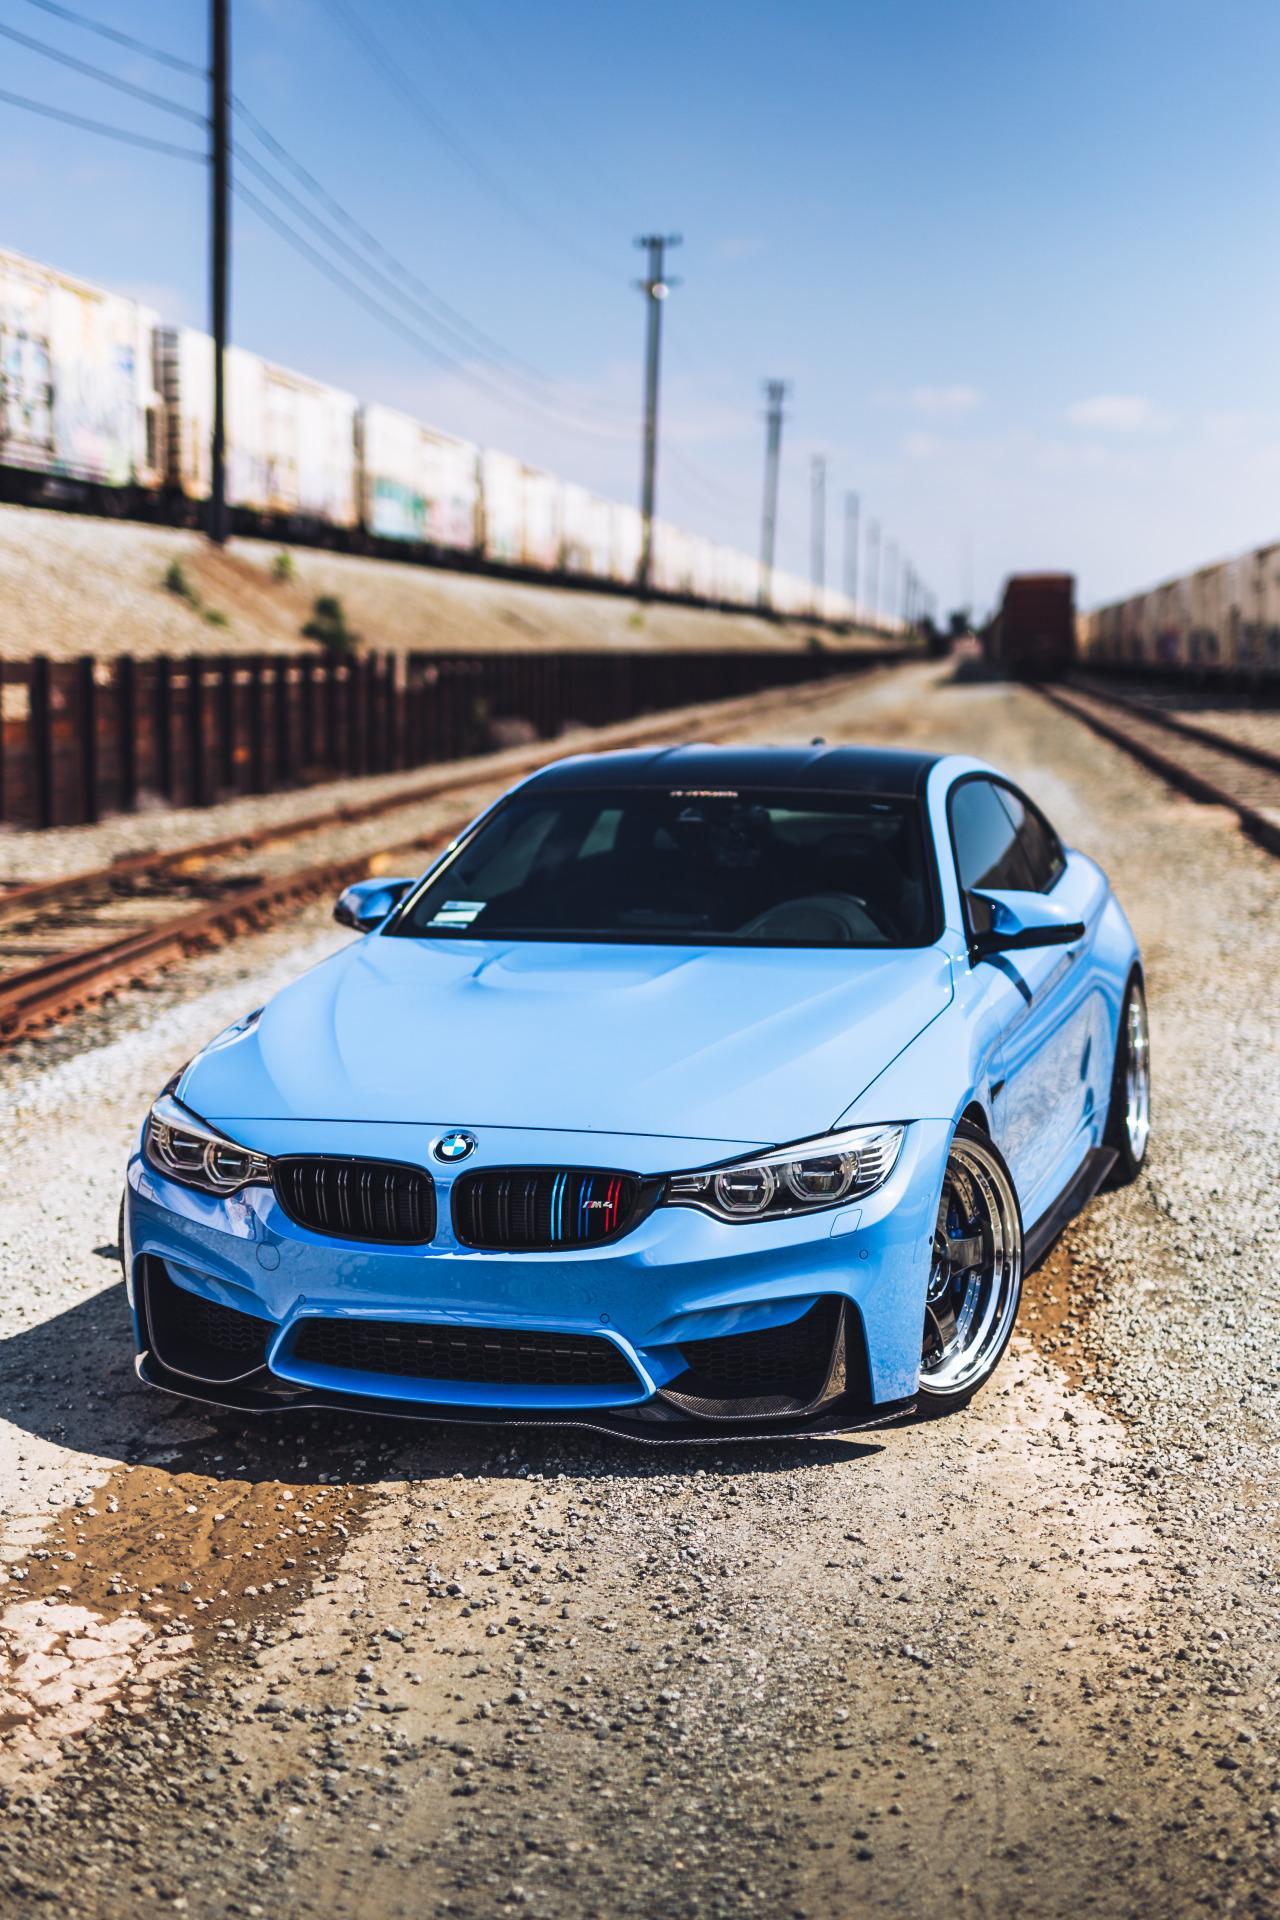 Bmw Hd Wallpapers For Android